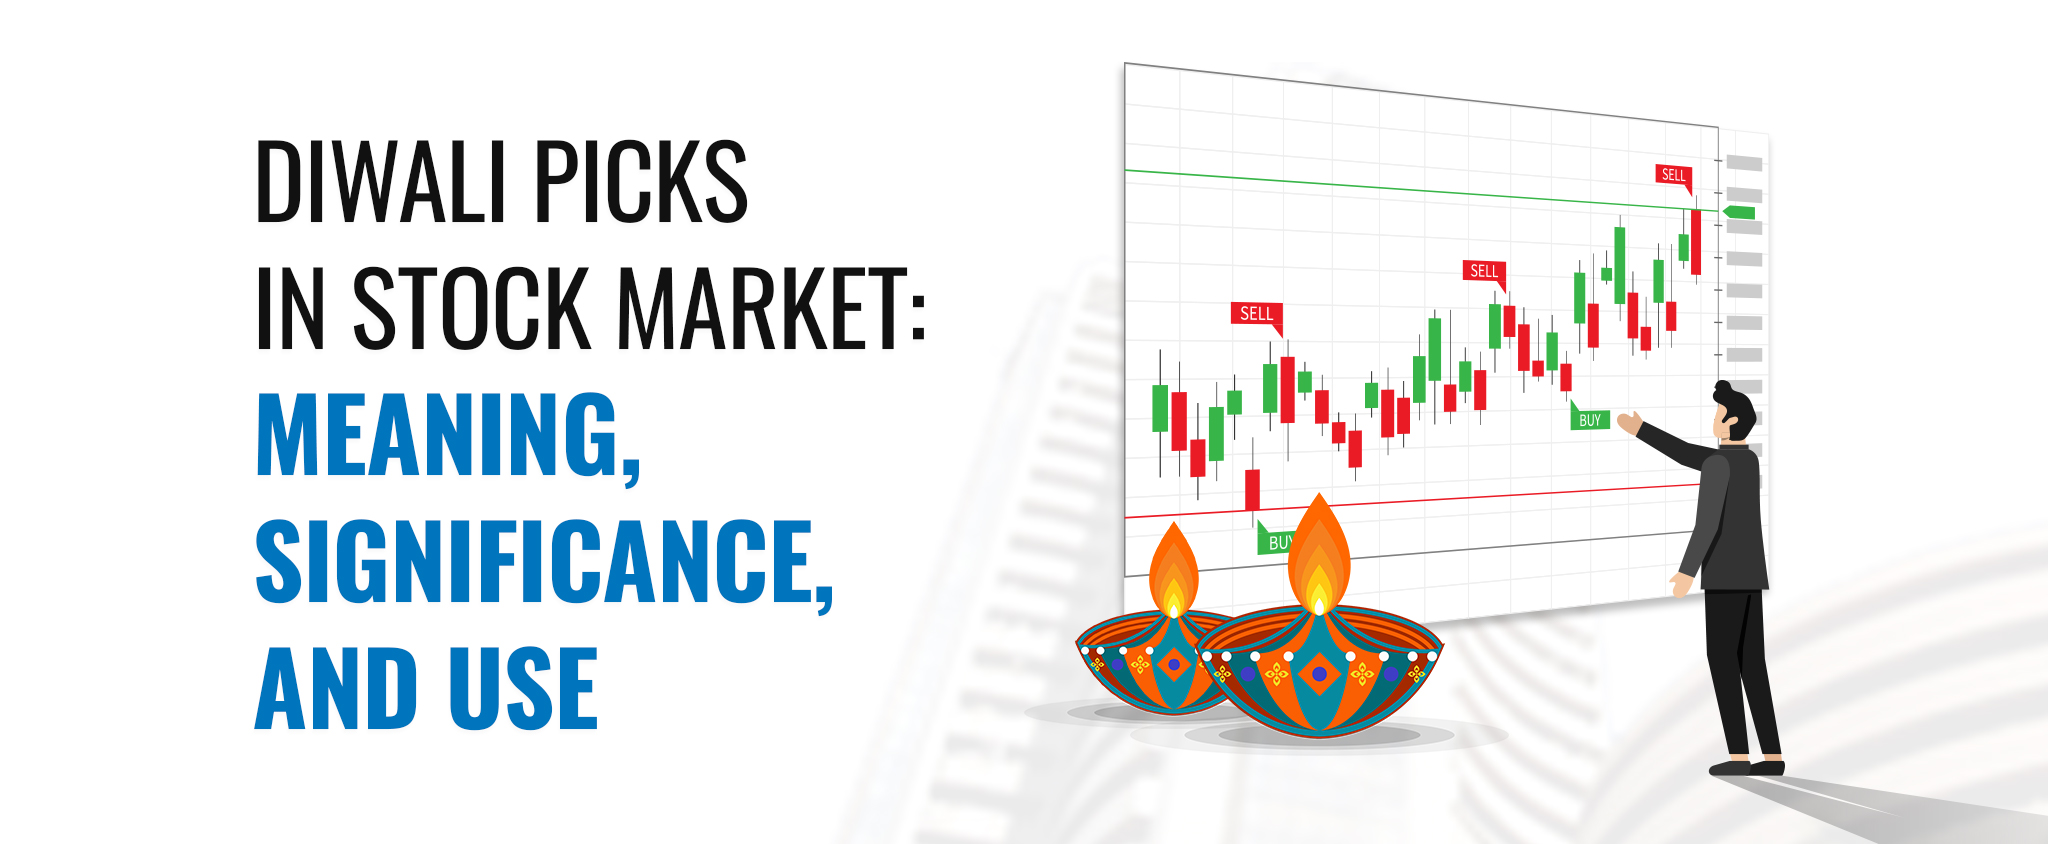 Diwali Picks In Stock Market: Meaning, Significance, and Use